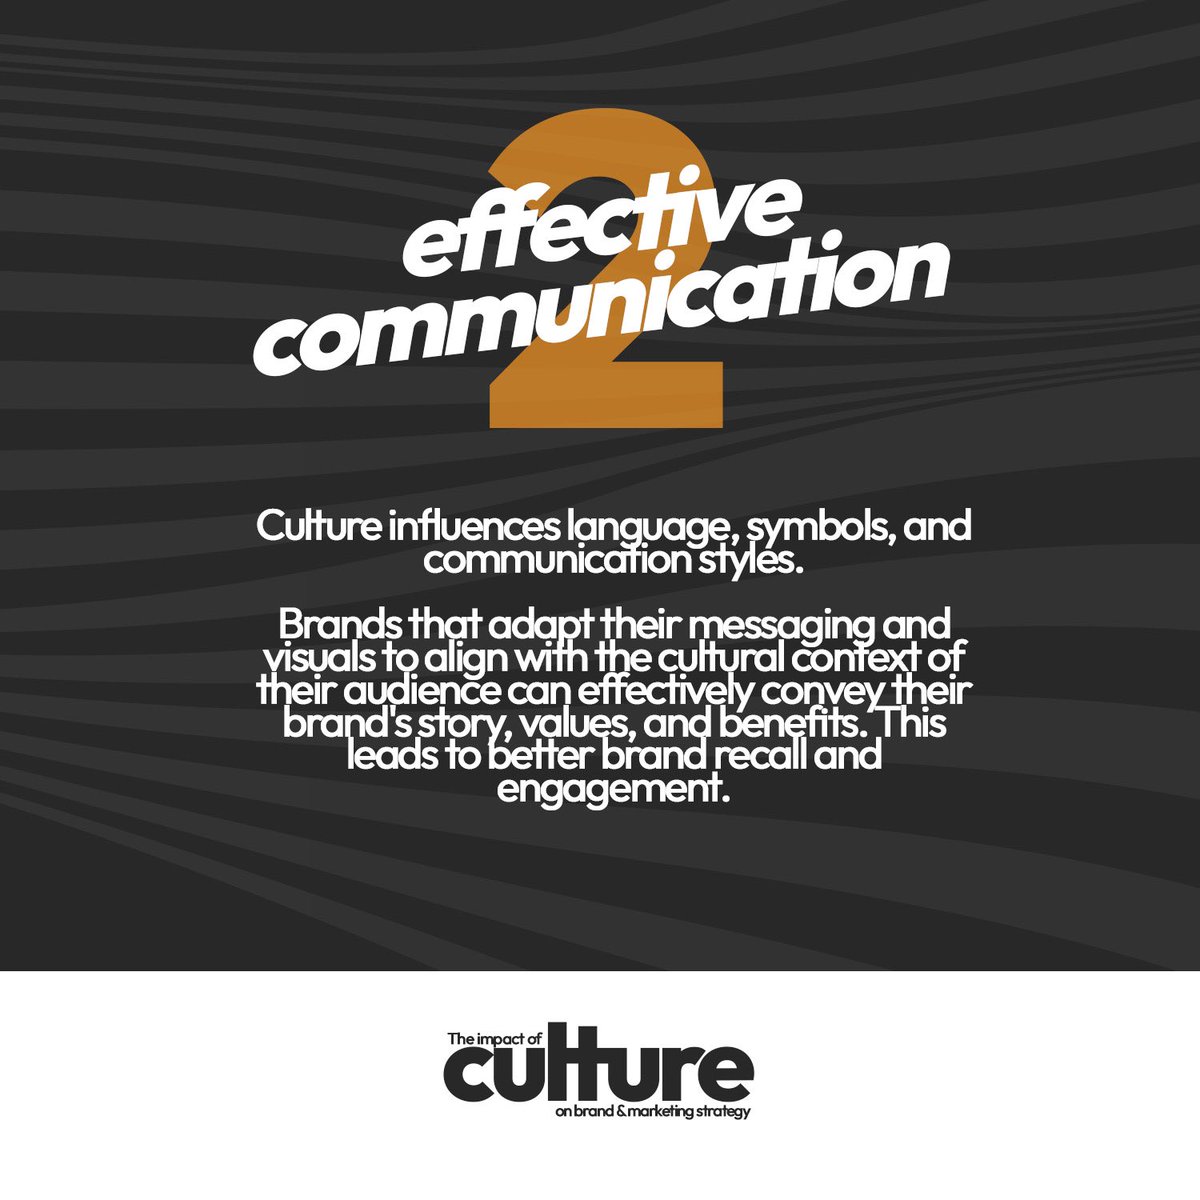 'Culture eats strategy for breakfast!'.

If your strategy isn't bang on Culture, it's Dead-On-Arrival. 

This is why some ‘textbook’ strategies don't necessarily deliver in local markets. 

THREAD 

#CulturalInfluence